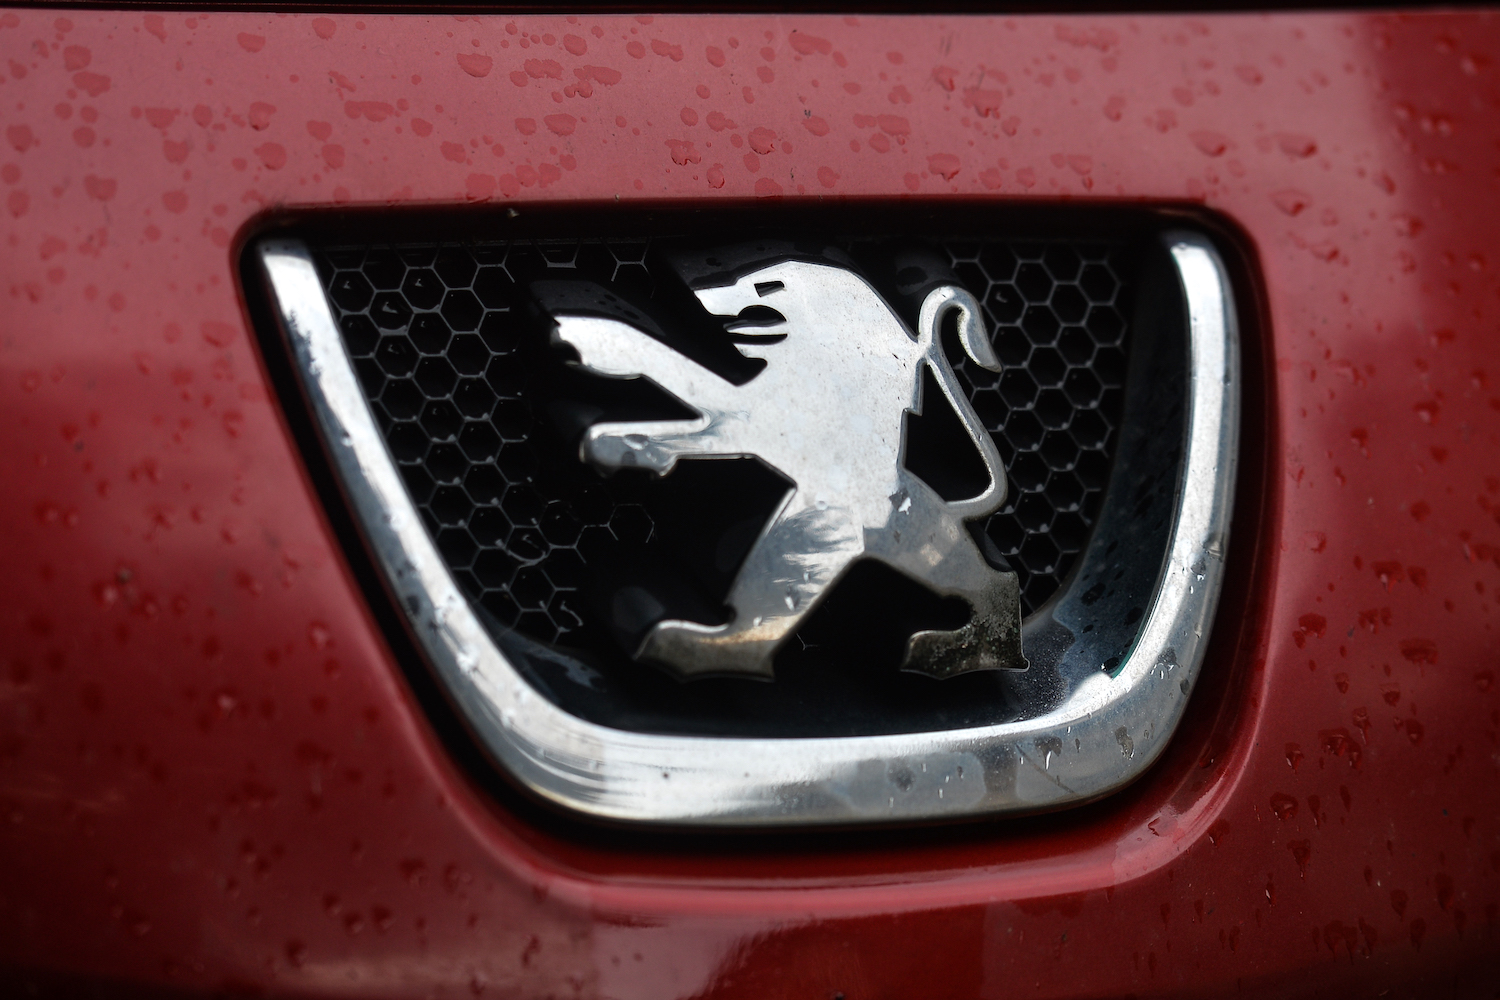 Closeup of a lion car logo set into the small grille of a red car, rain drops visible on its paint.